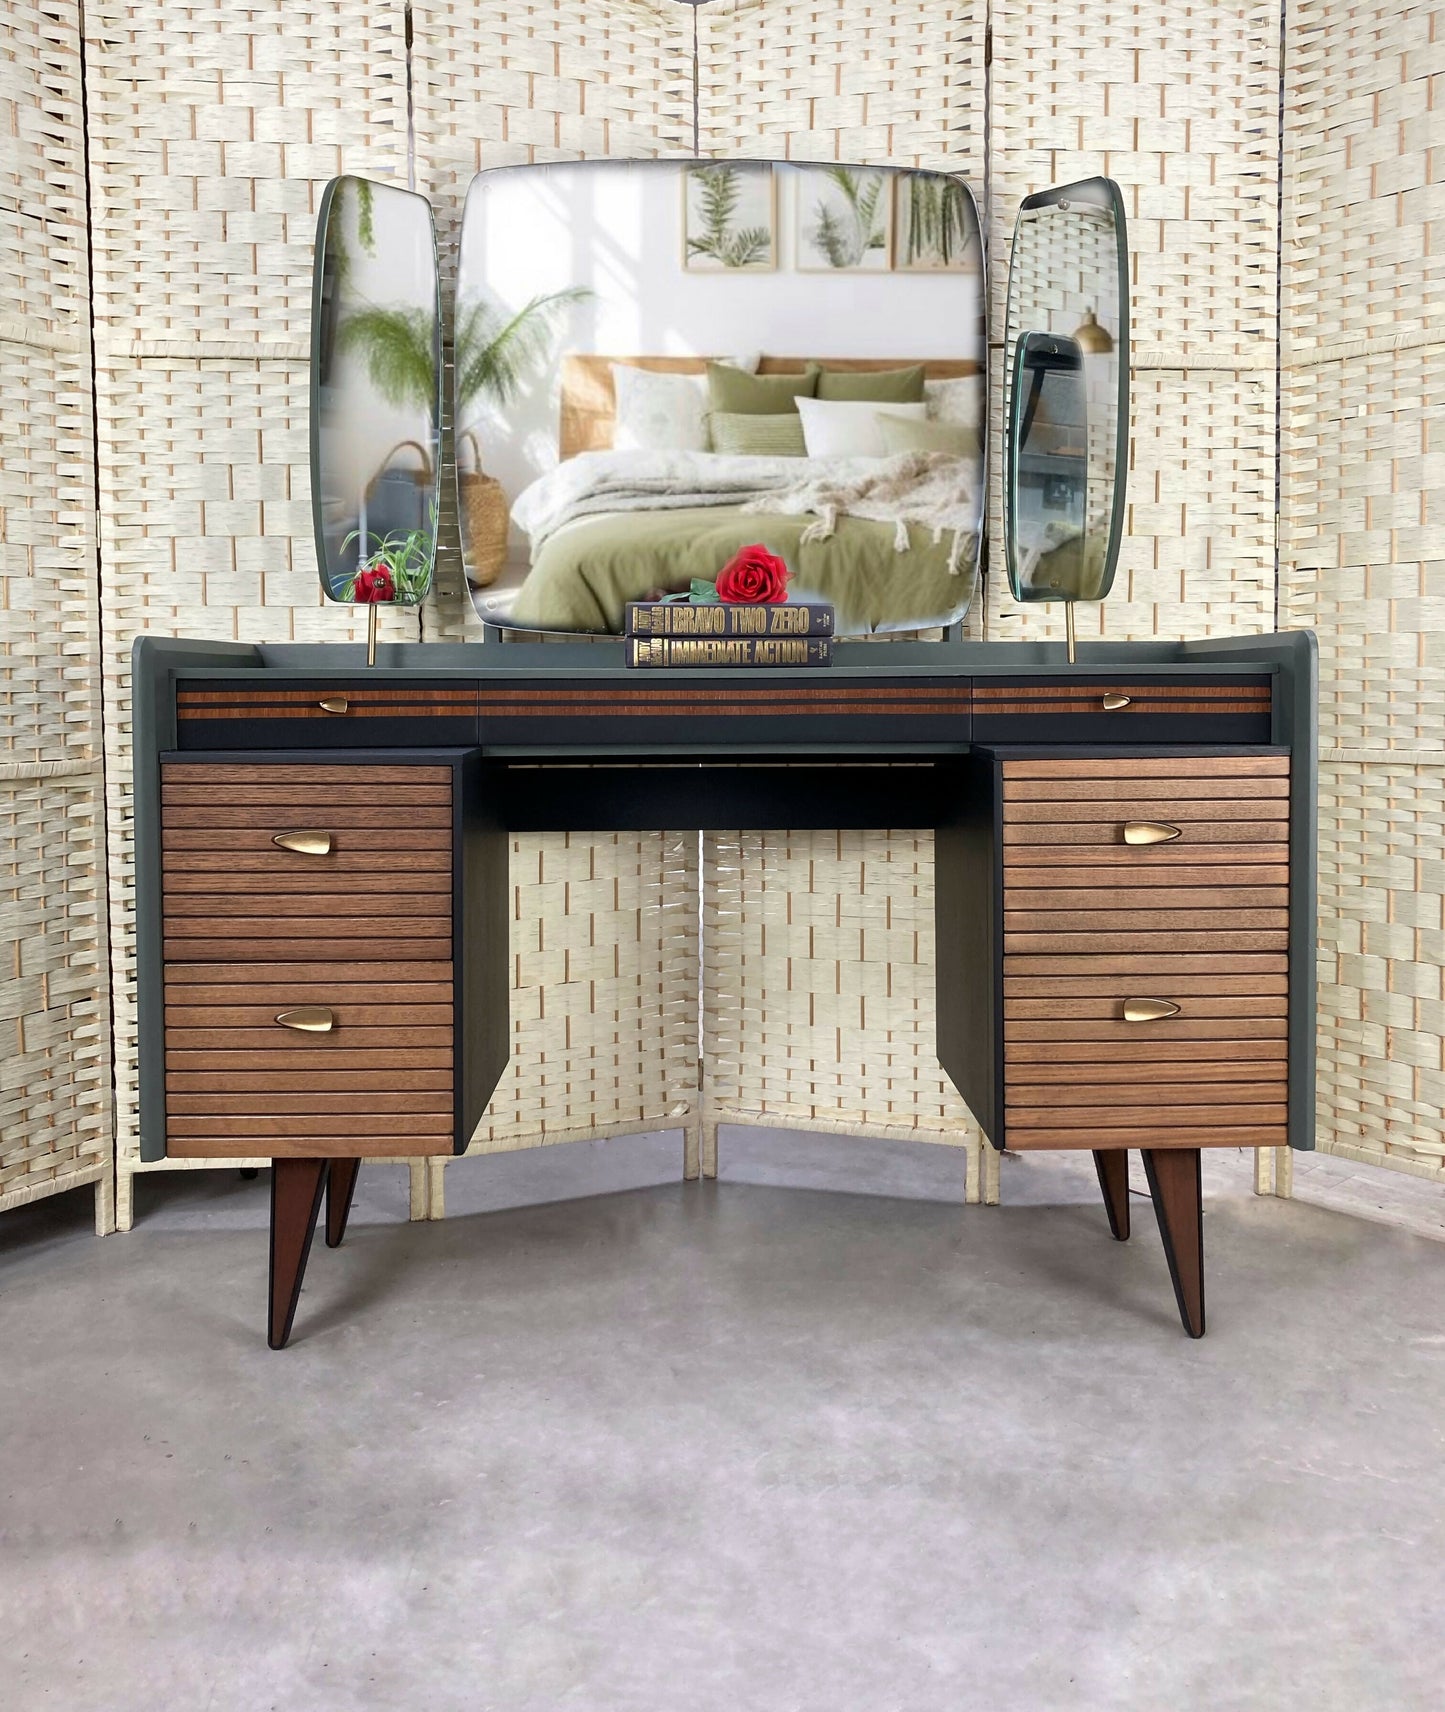 Retro Mid Century Modern 3 piece Lebus Link bedroom set in Green, Black and Wood.